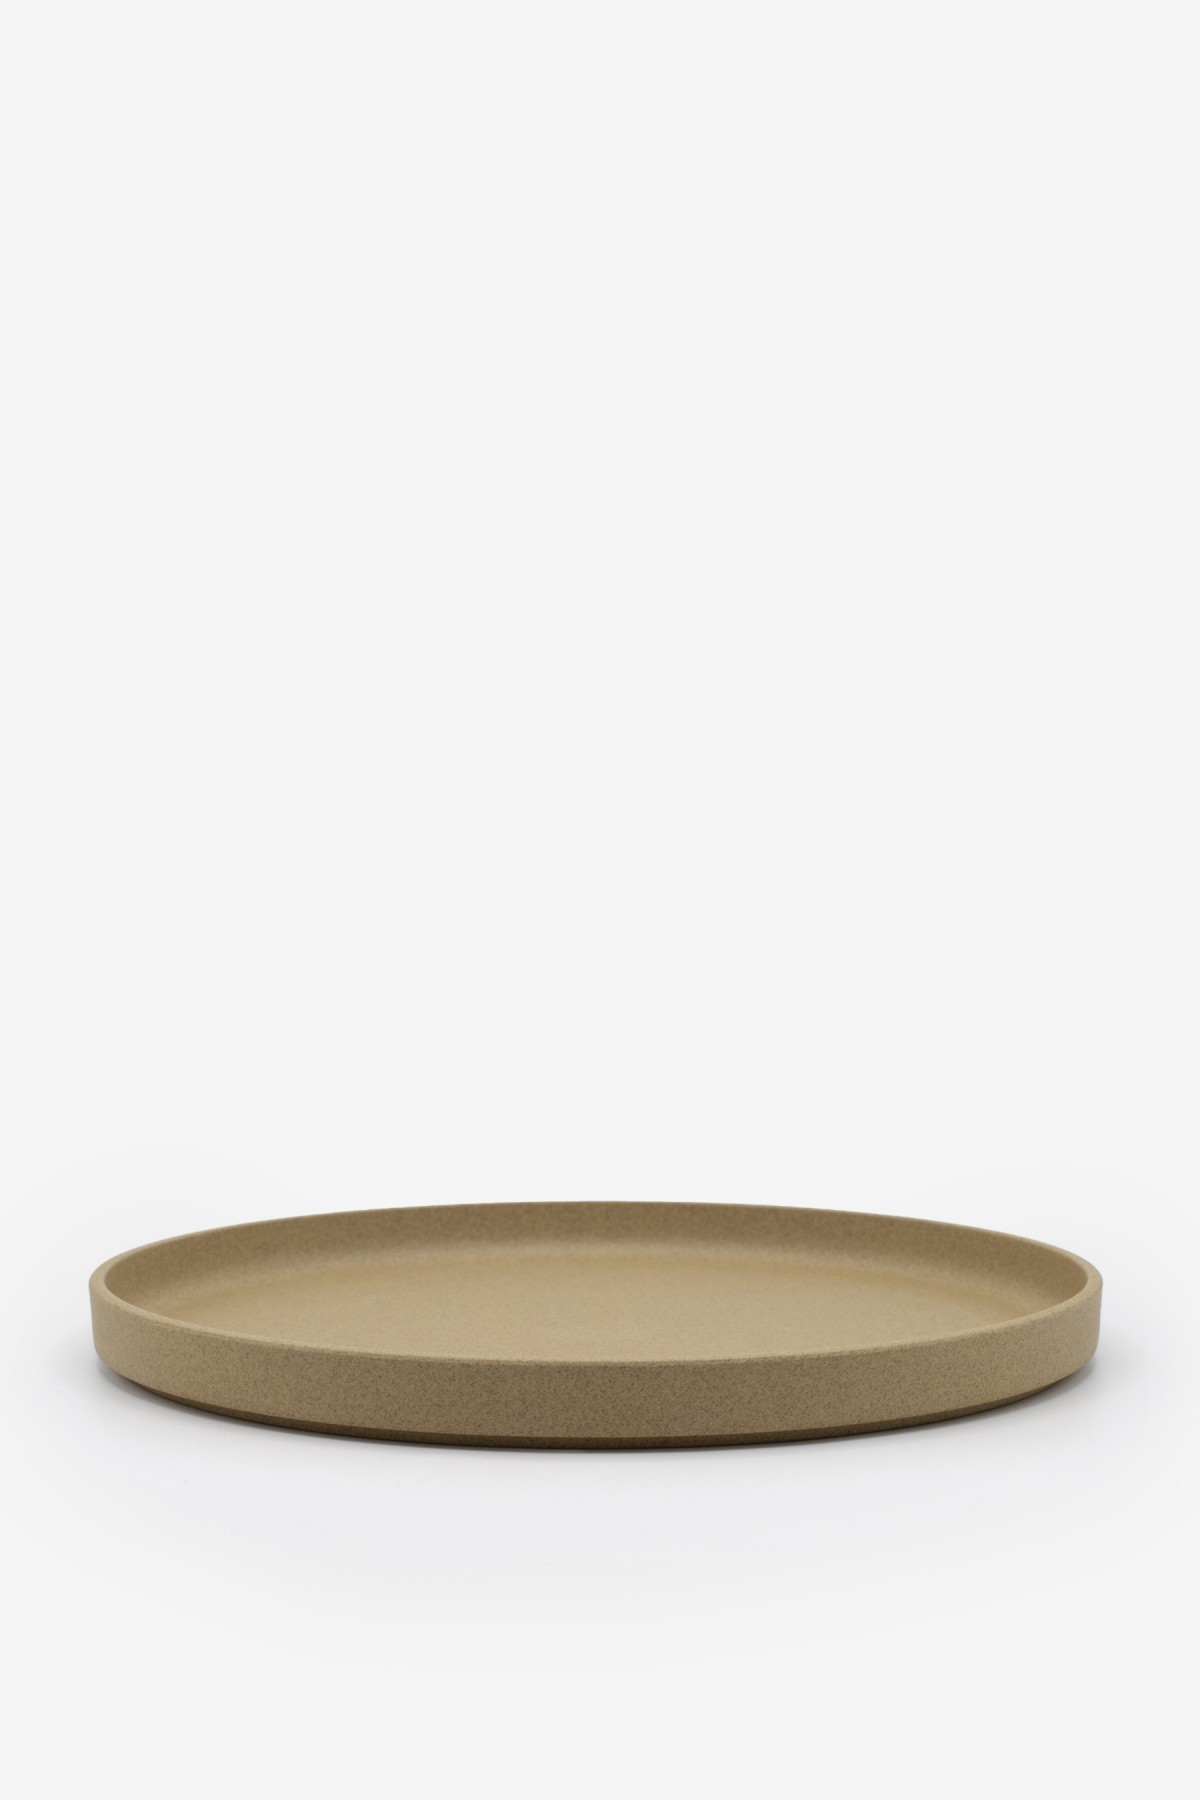 Hasami Porcelain Plate 255 in Sand